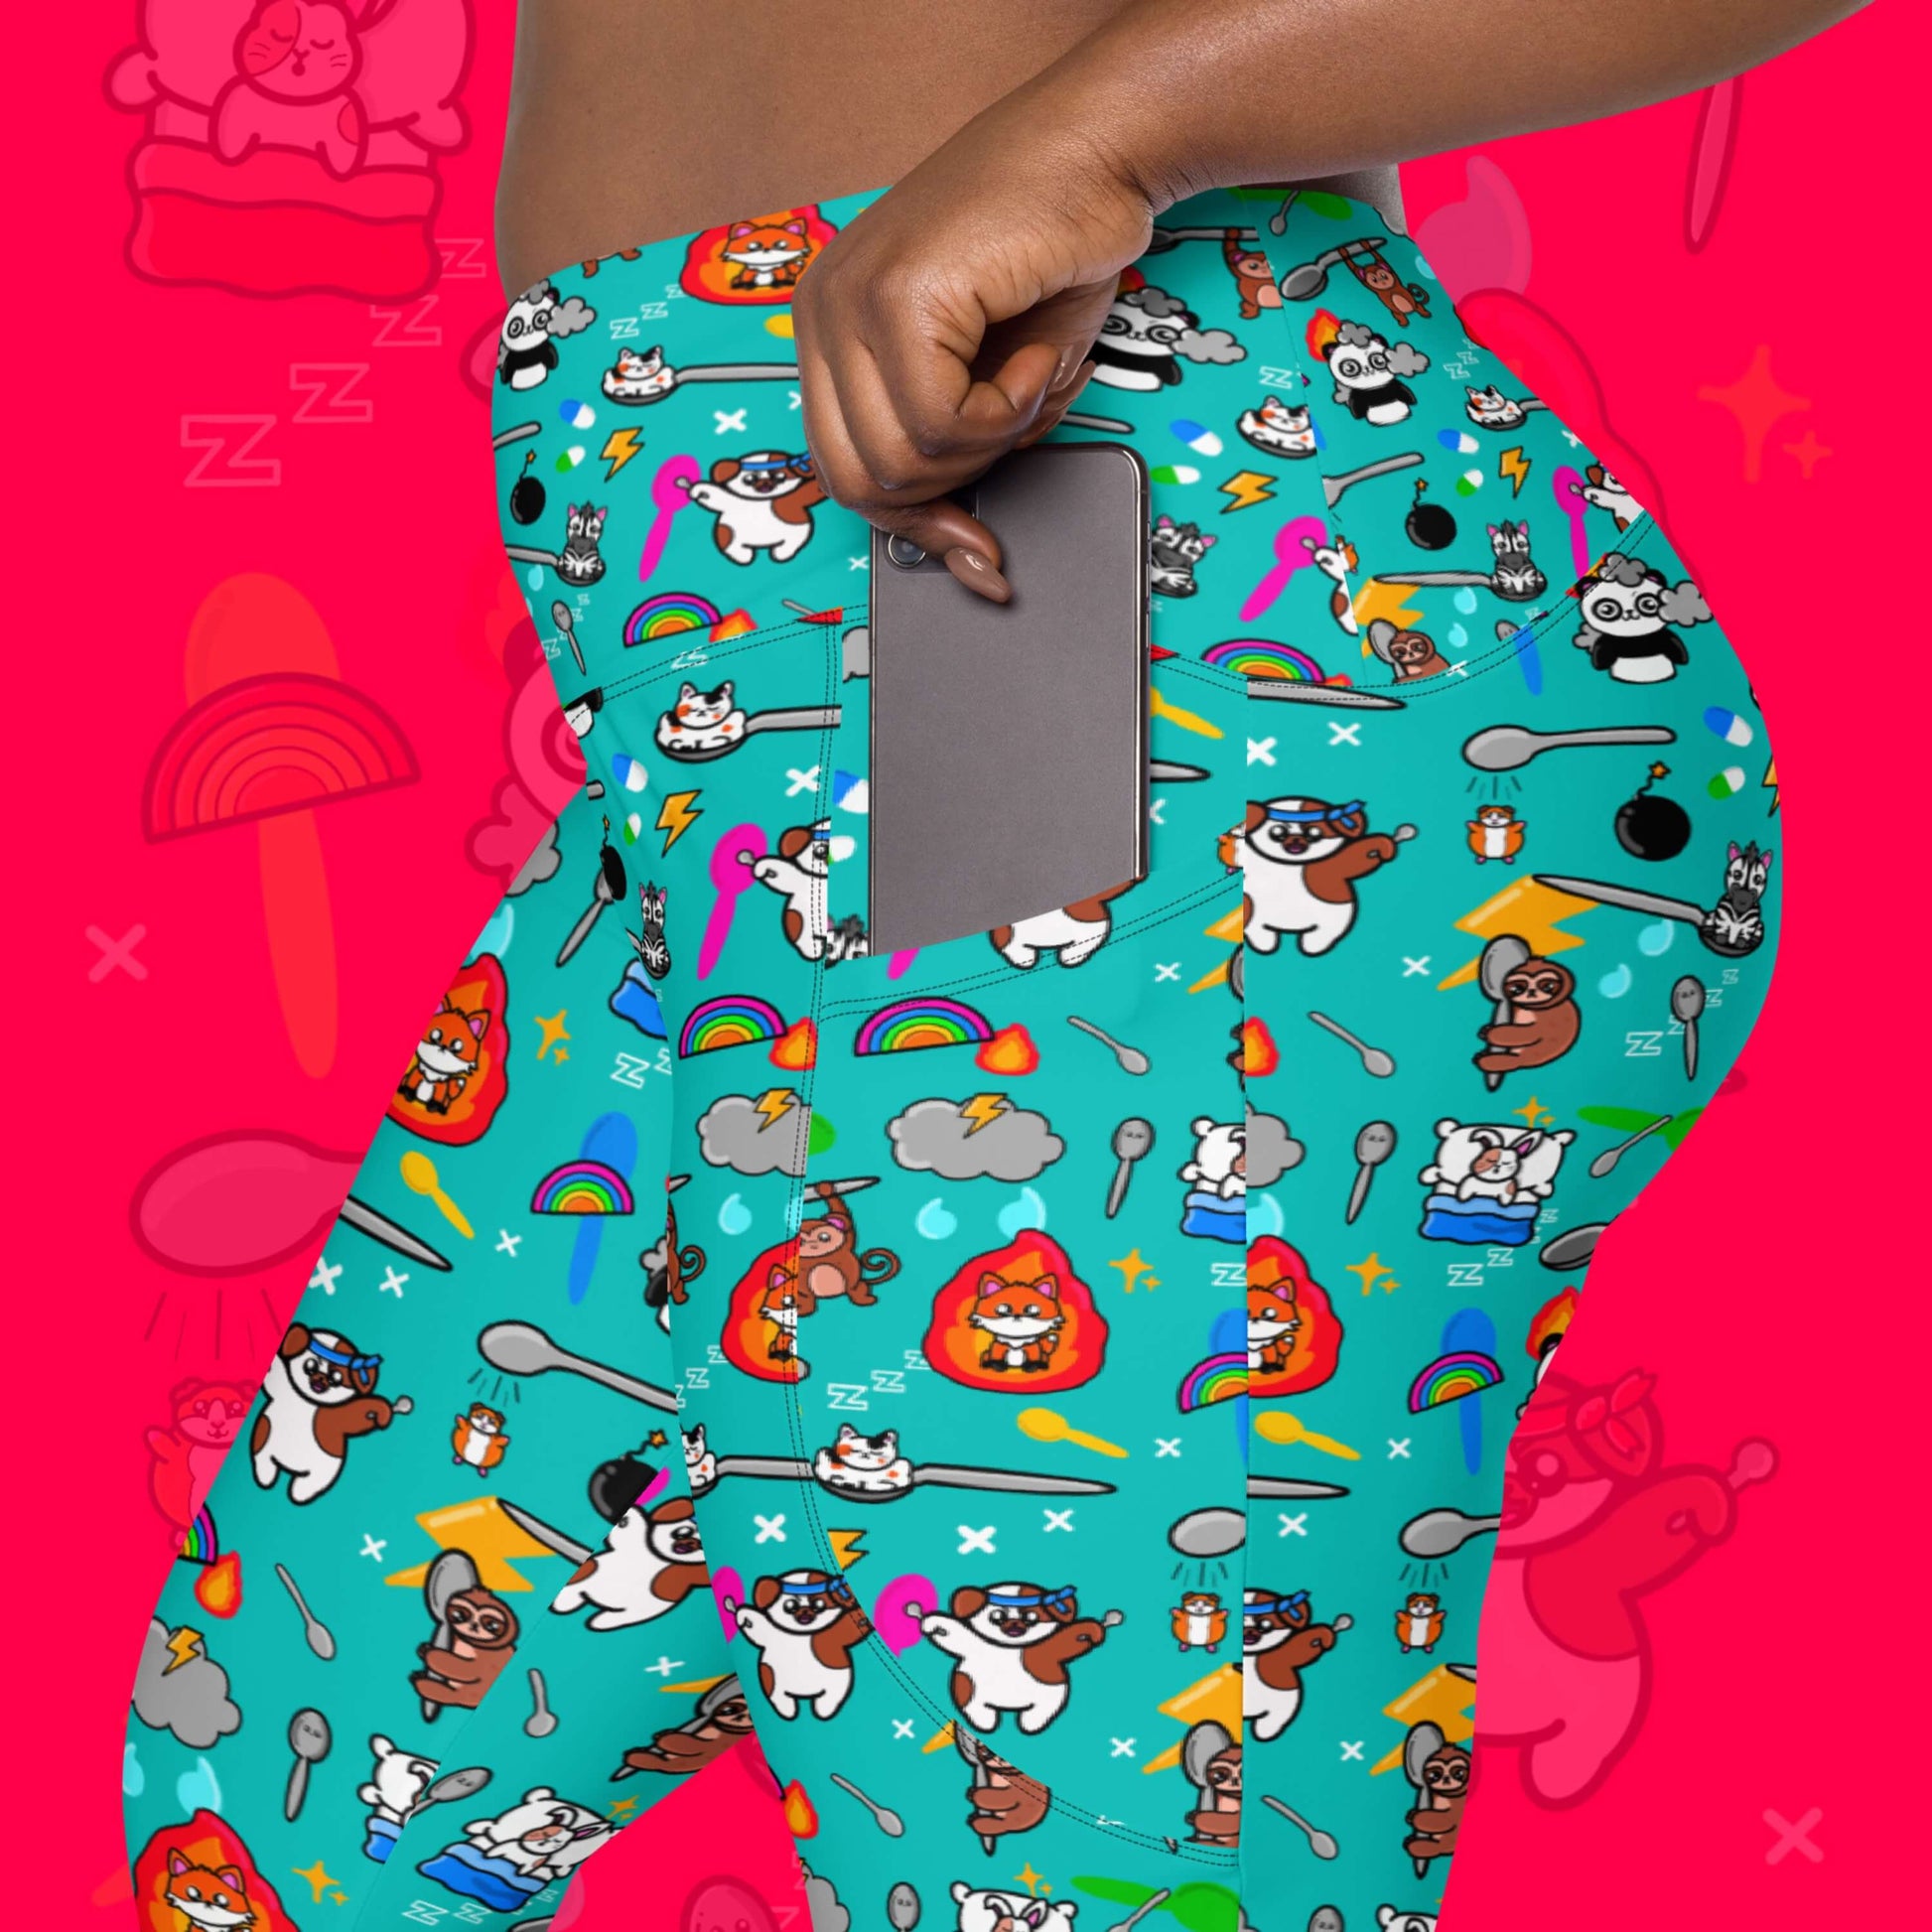 The Spoonie Leggings with Pockets modelled by a femme person putting a silver phone in the pocket on a red background with a faded version of the print in the background. The blue leggings feature various invisible illness themed animals, rainbows, spoons, sparkles, flames, pills and lightning bolts. Raising awareness for hidden disabilities.